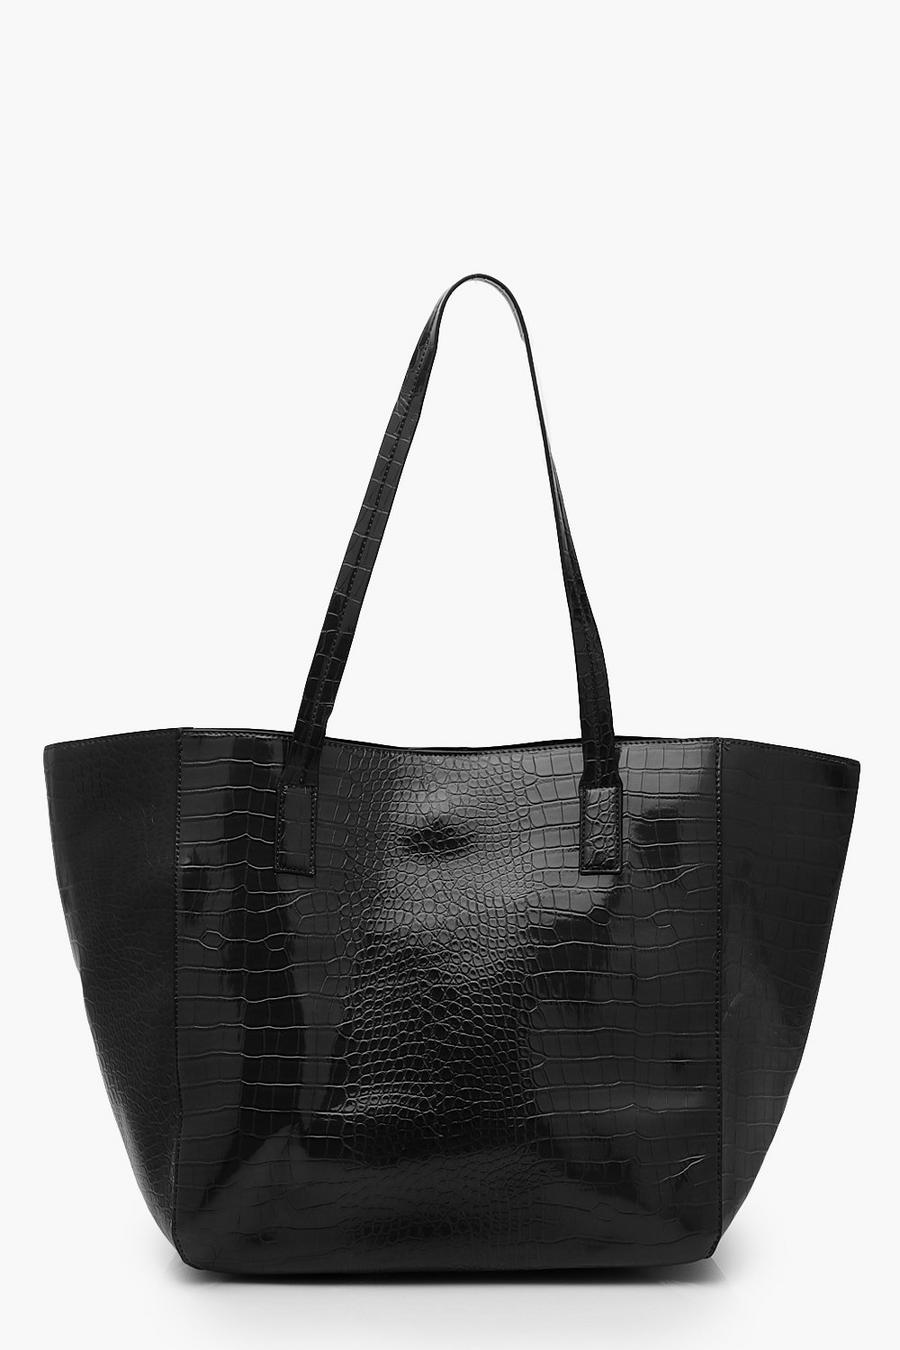 Black Oversized Faux Leather Croc Tote Day Bag image number 1